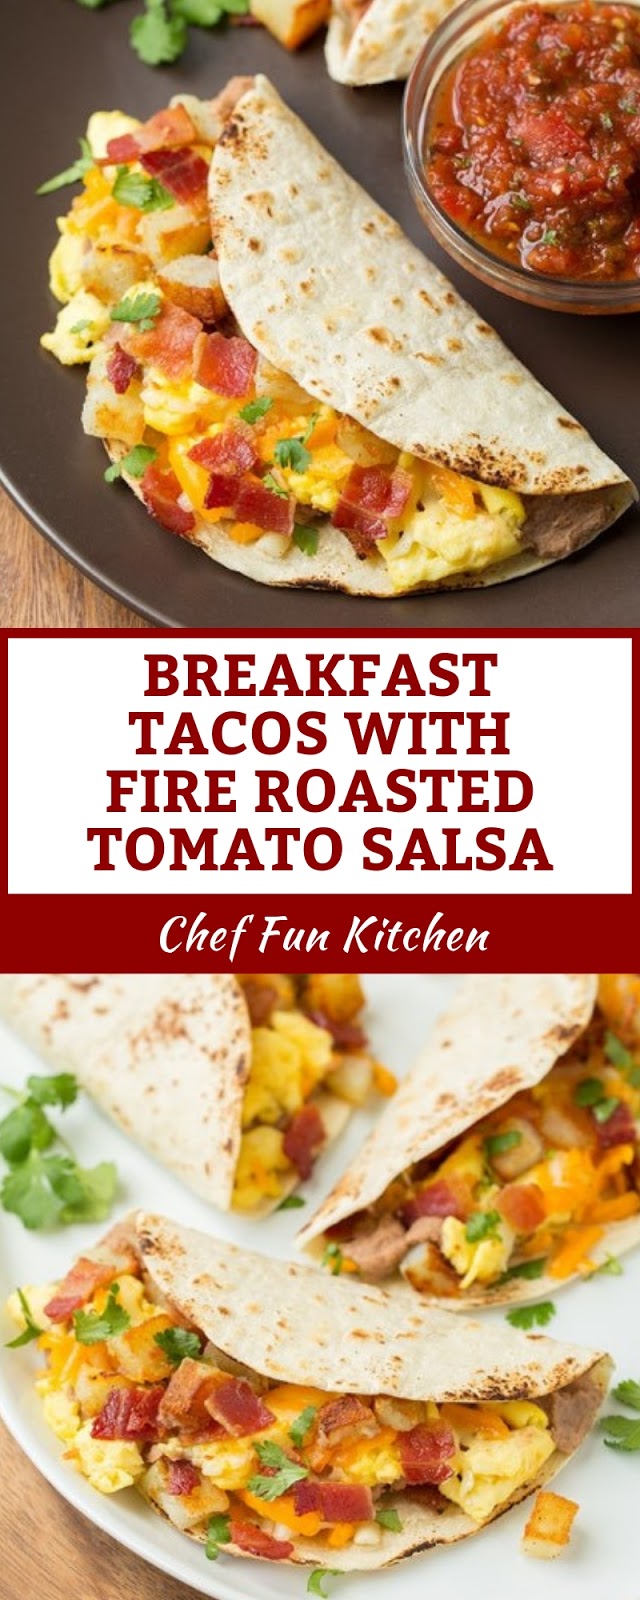 BREAKFAST TACOS WITH FIRE ROASTED TOMATO SALSA